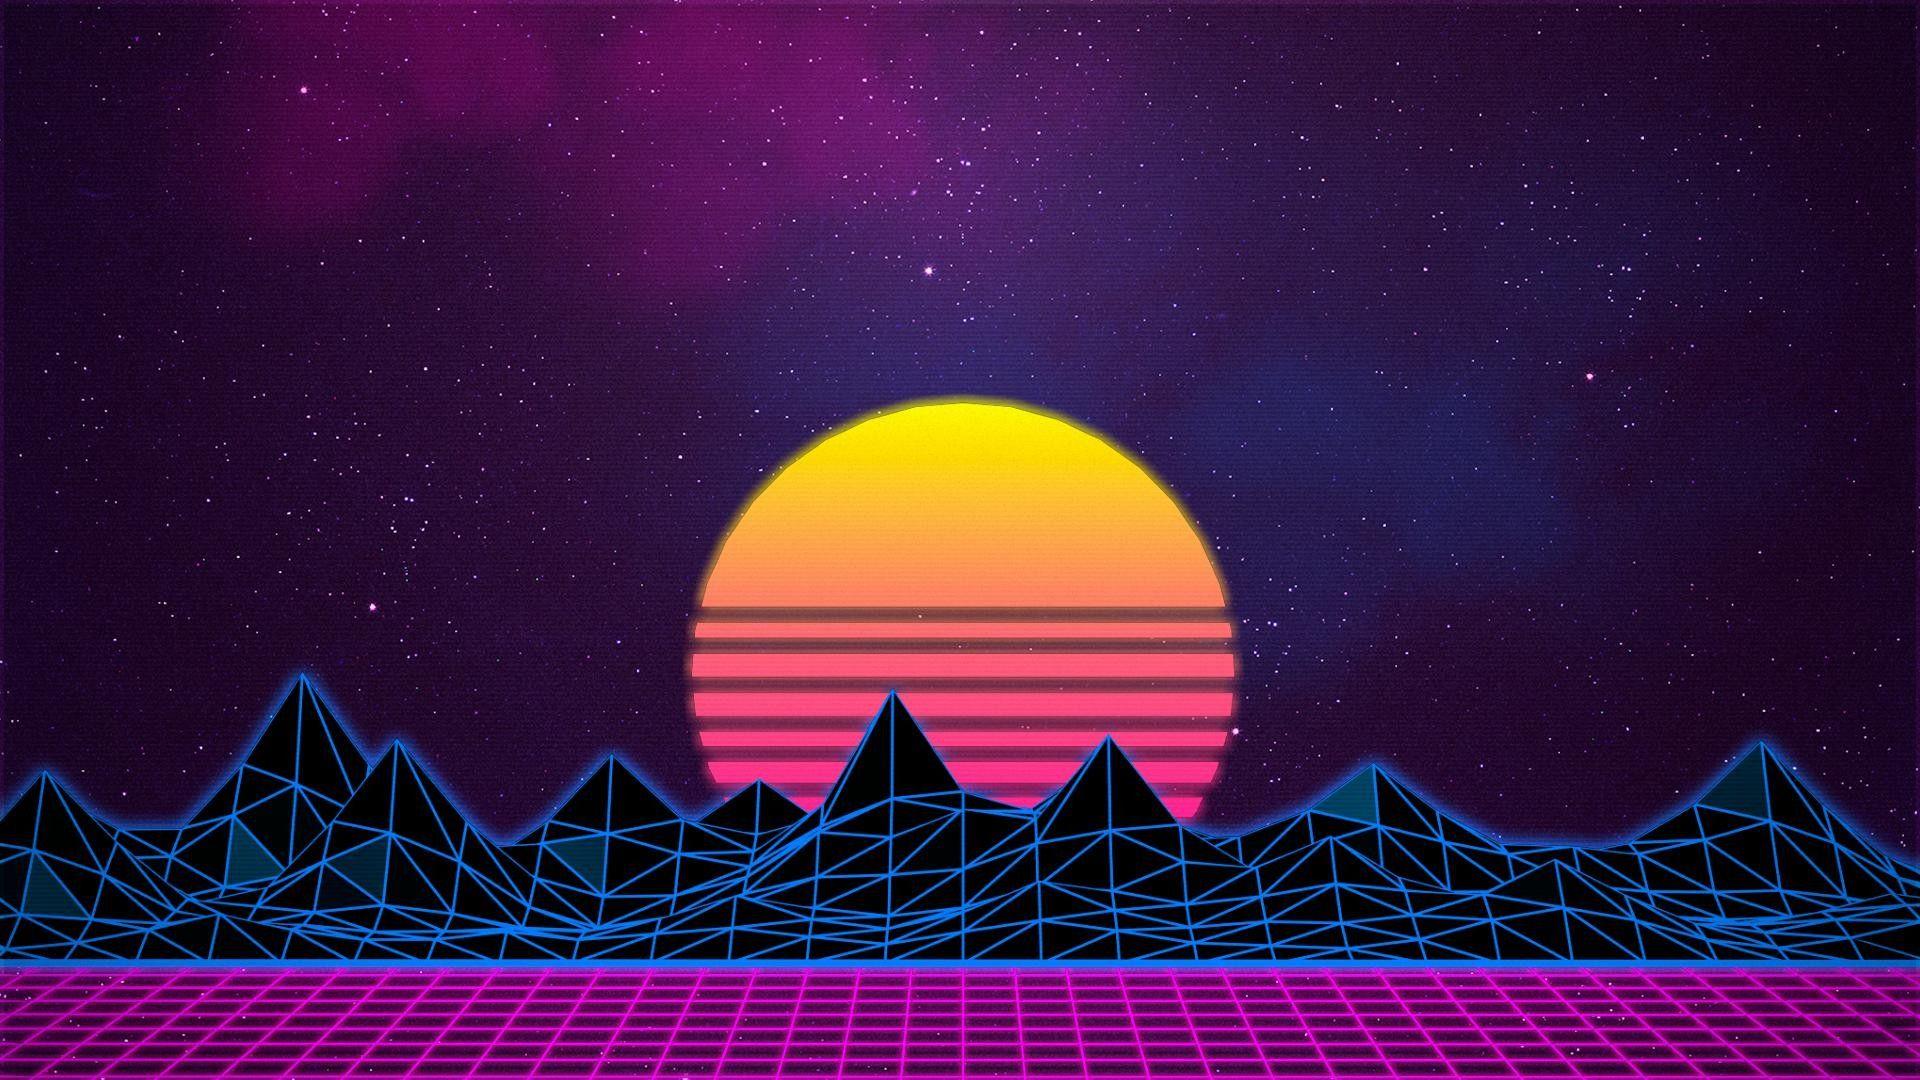 80s Retro Computer Wallpapers - Top Free 80s Retro Computer Backgrounds